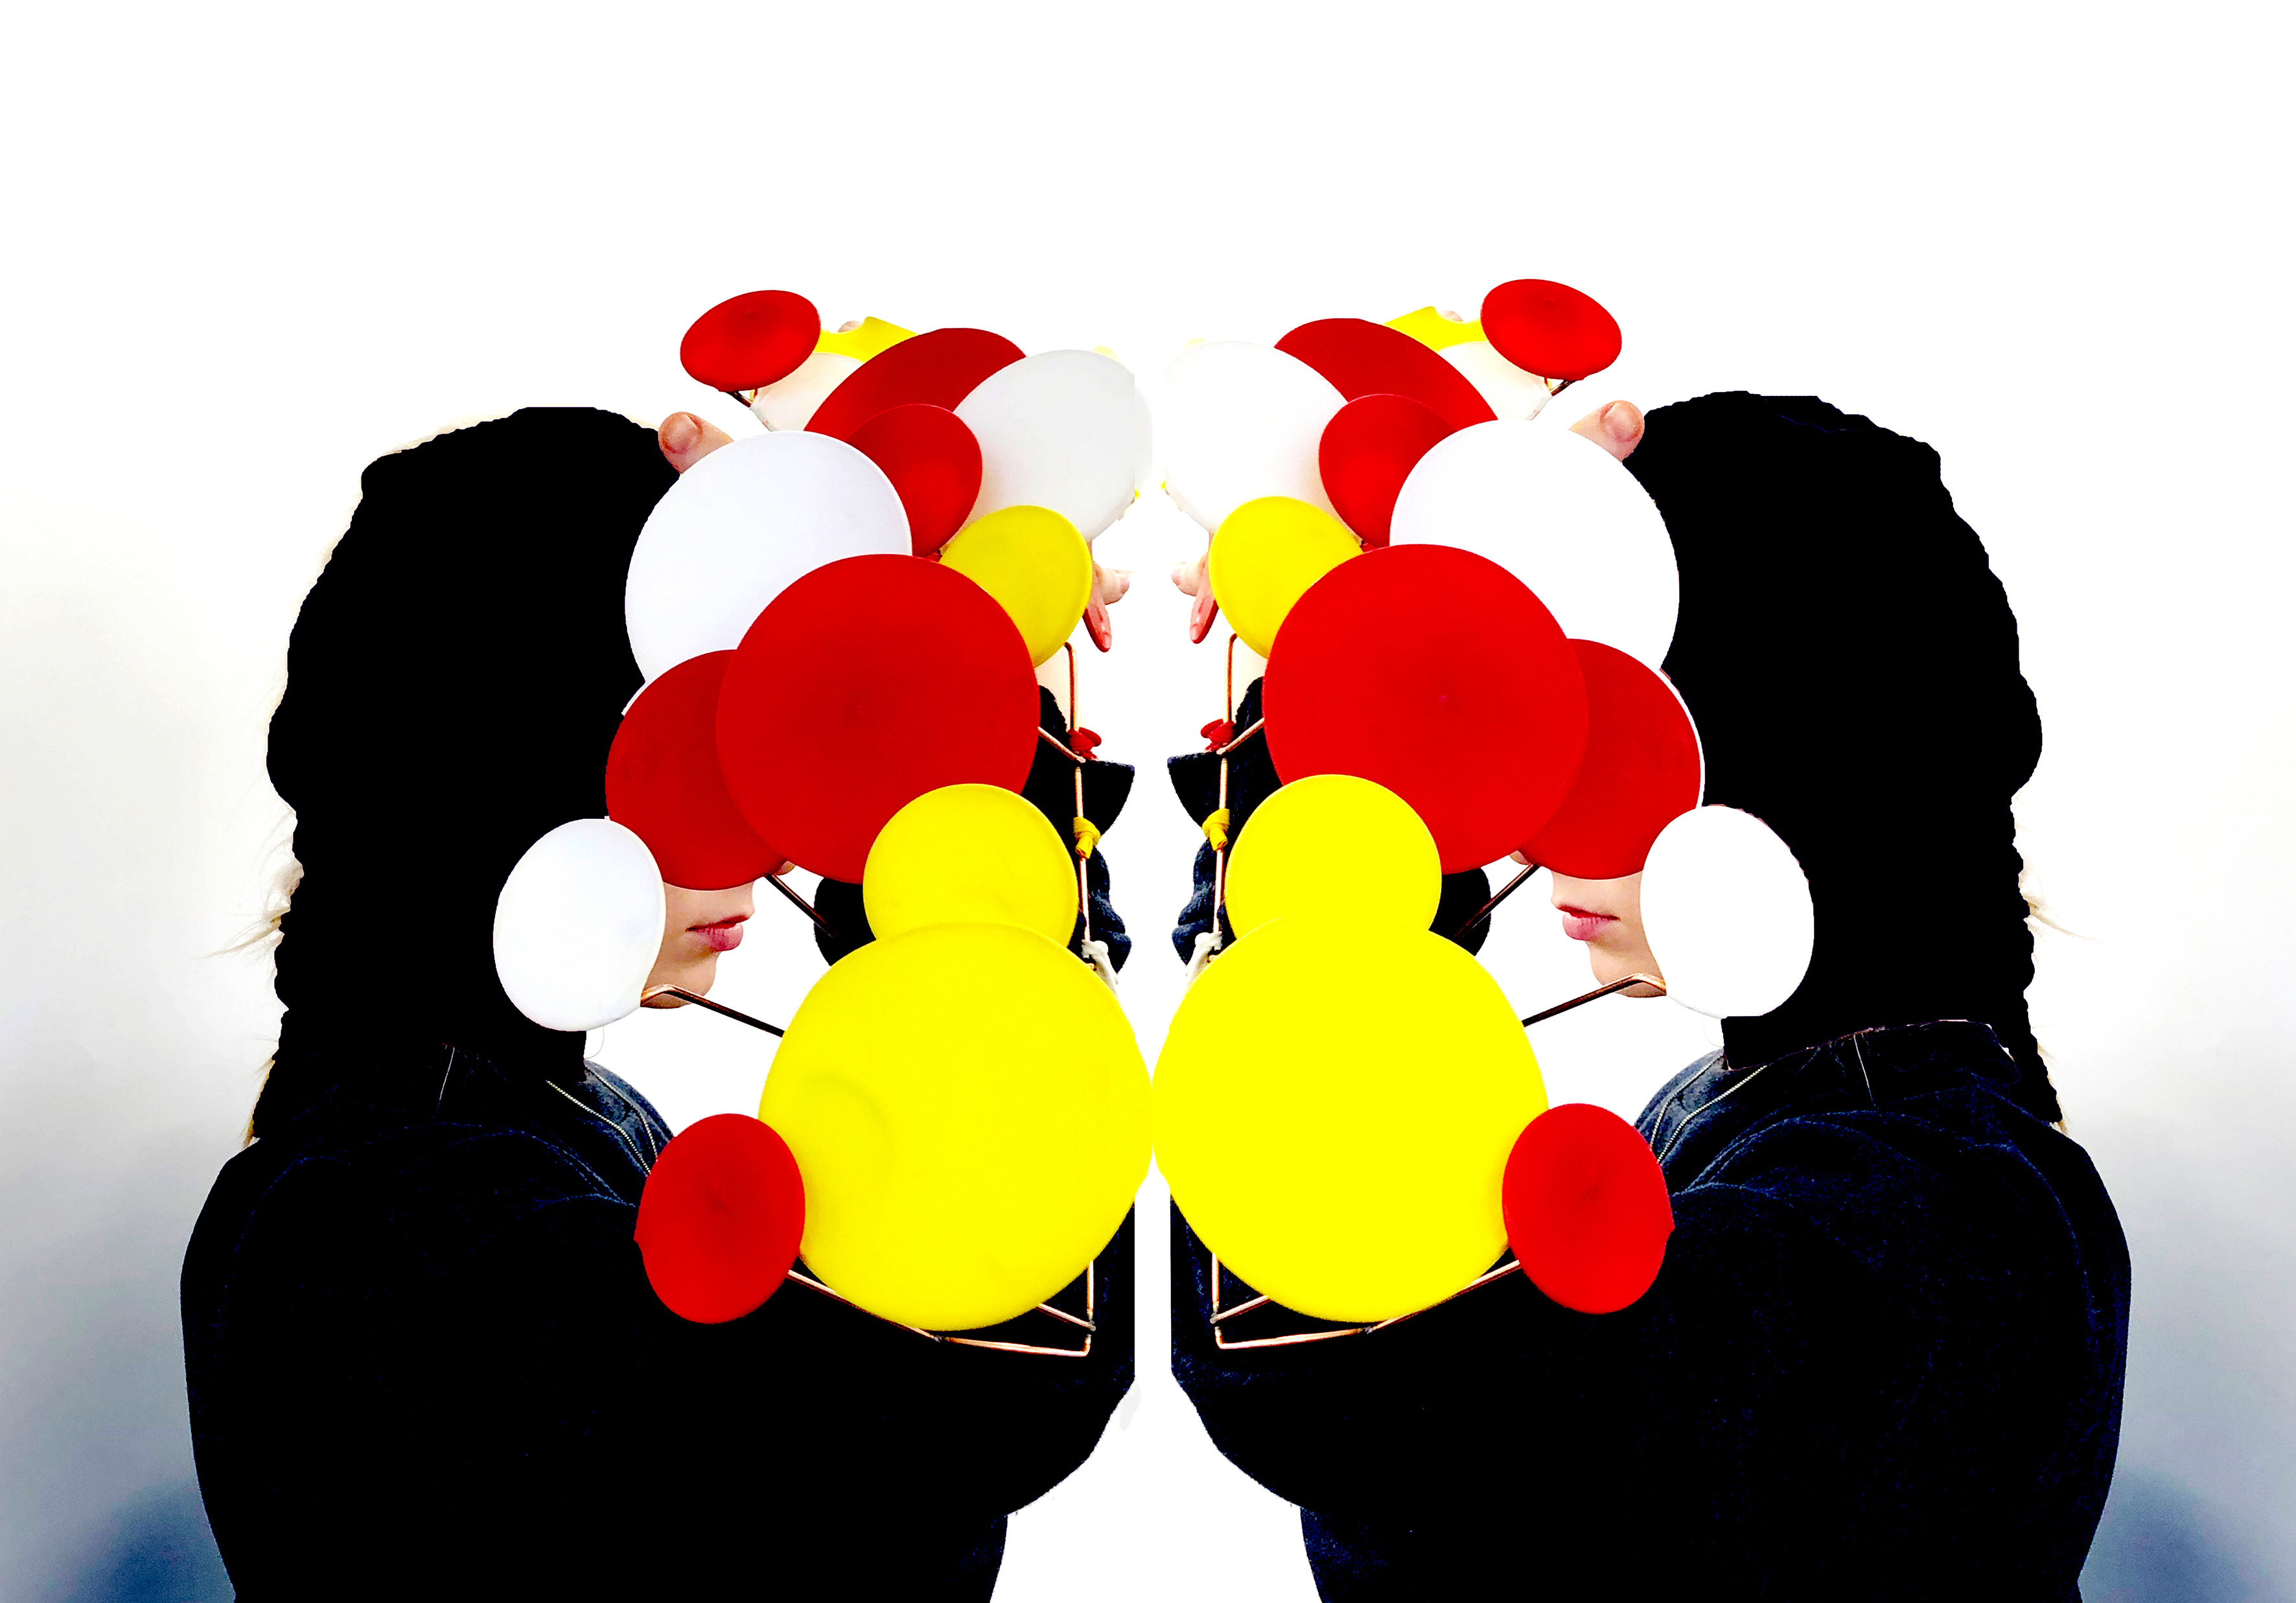 Mirror image of person with red, white and yellow objects in front of face